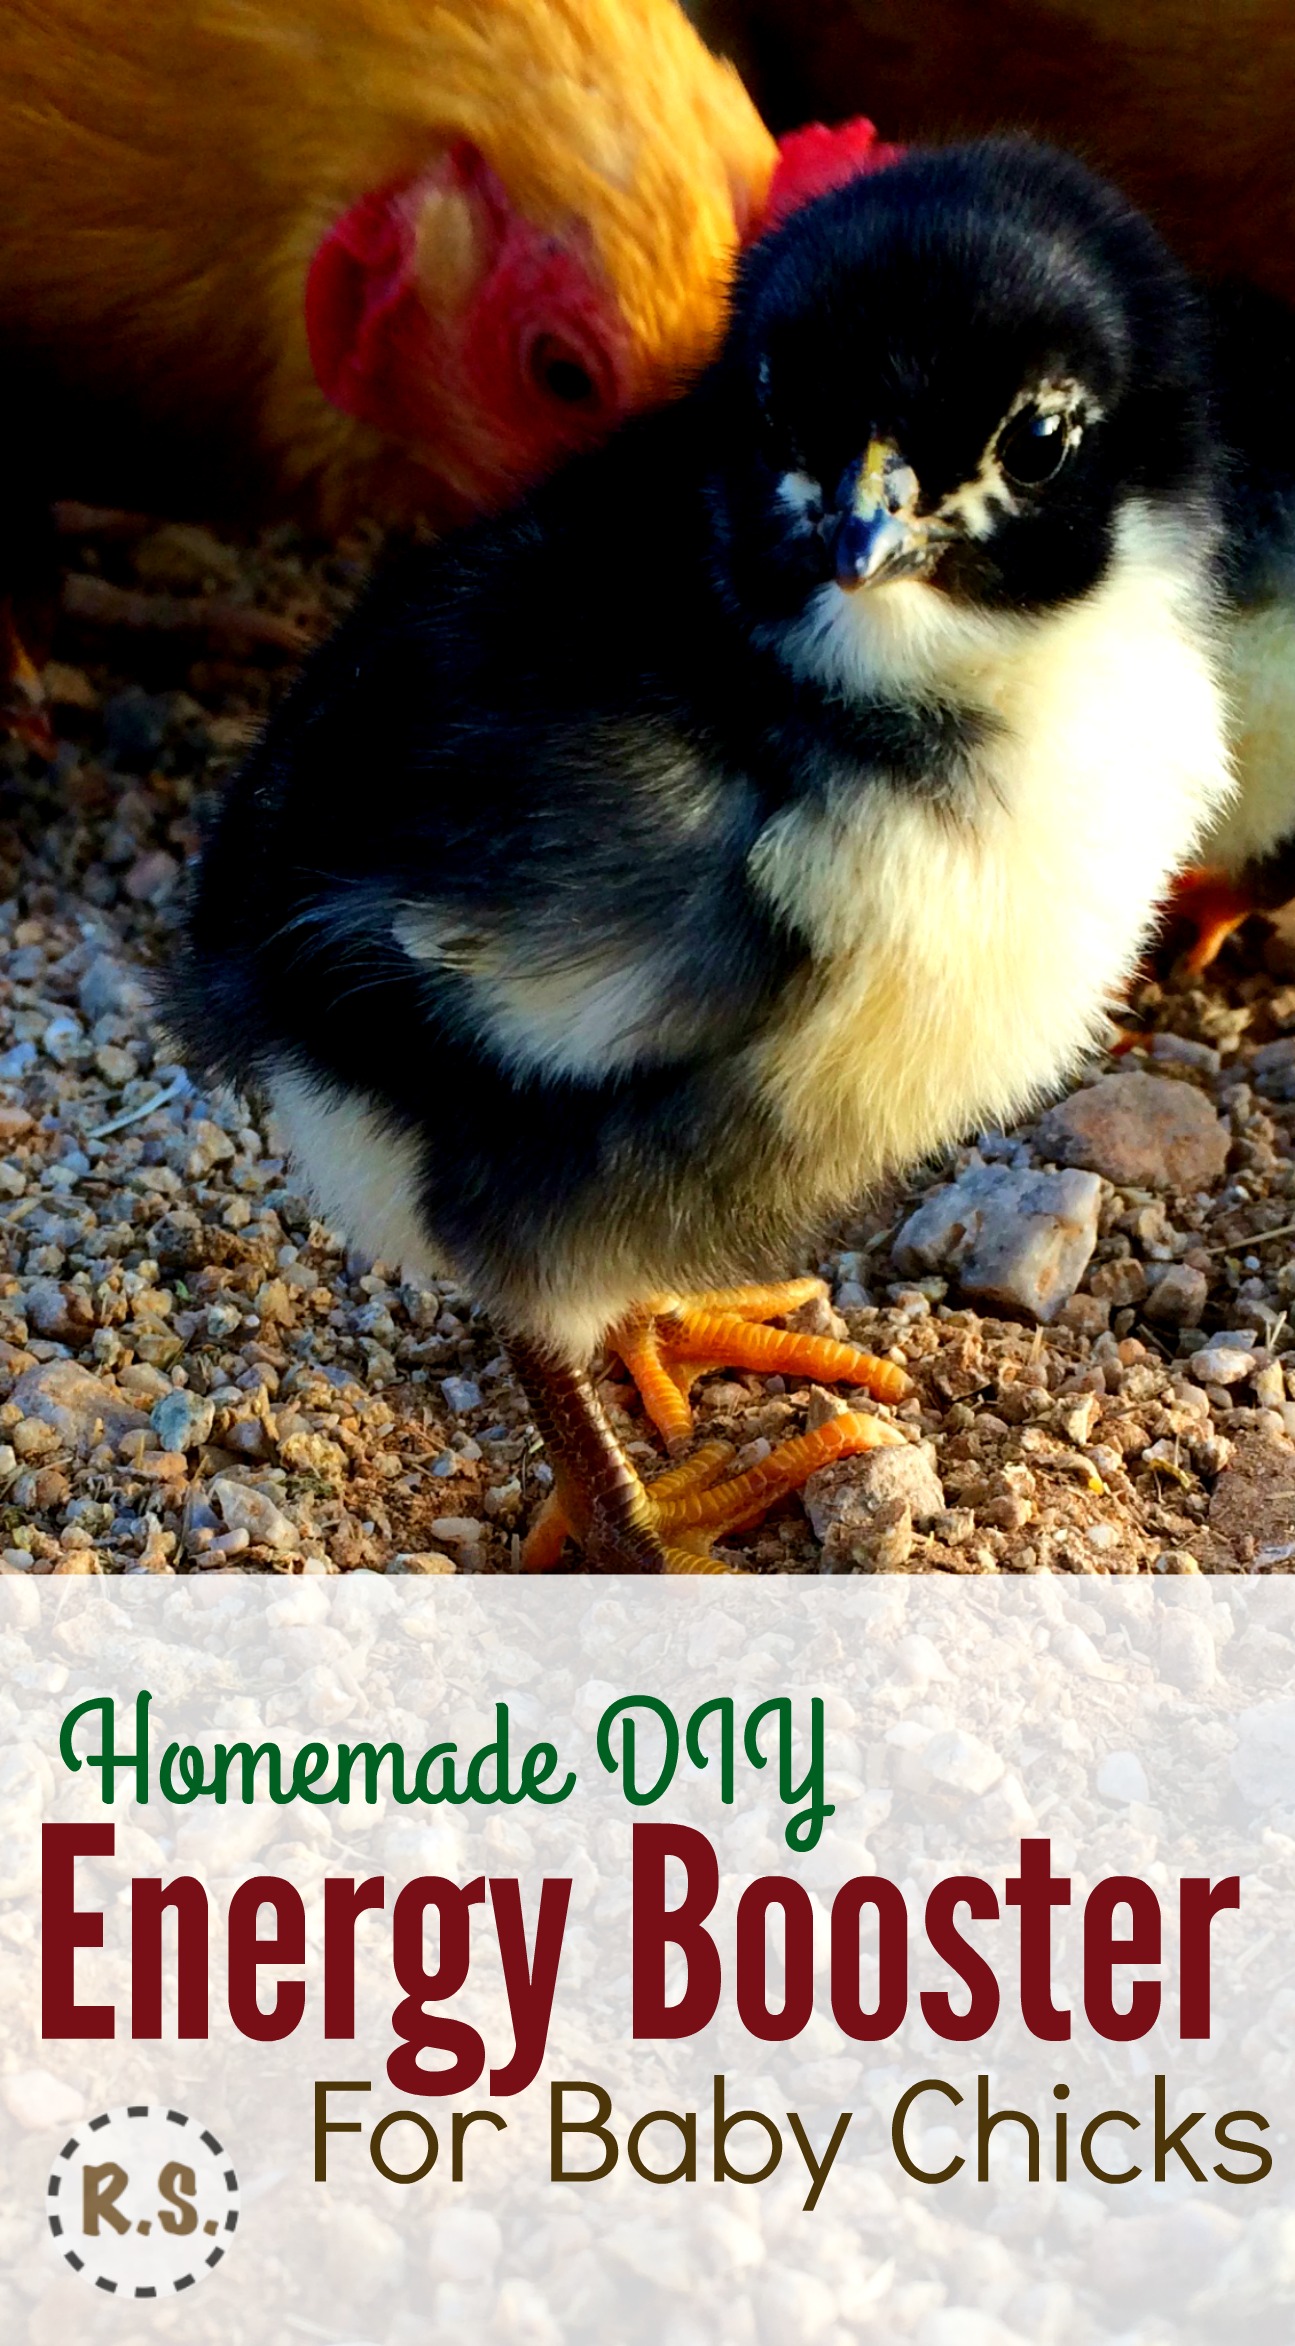 Raising baby chicks? Here’s a DIY energy booster or electrolyte recipe you can put in their water. Great for their health & easy for beginners. Important to getting your chicks off to a great start!